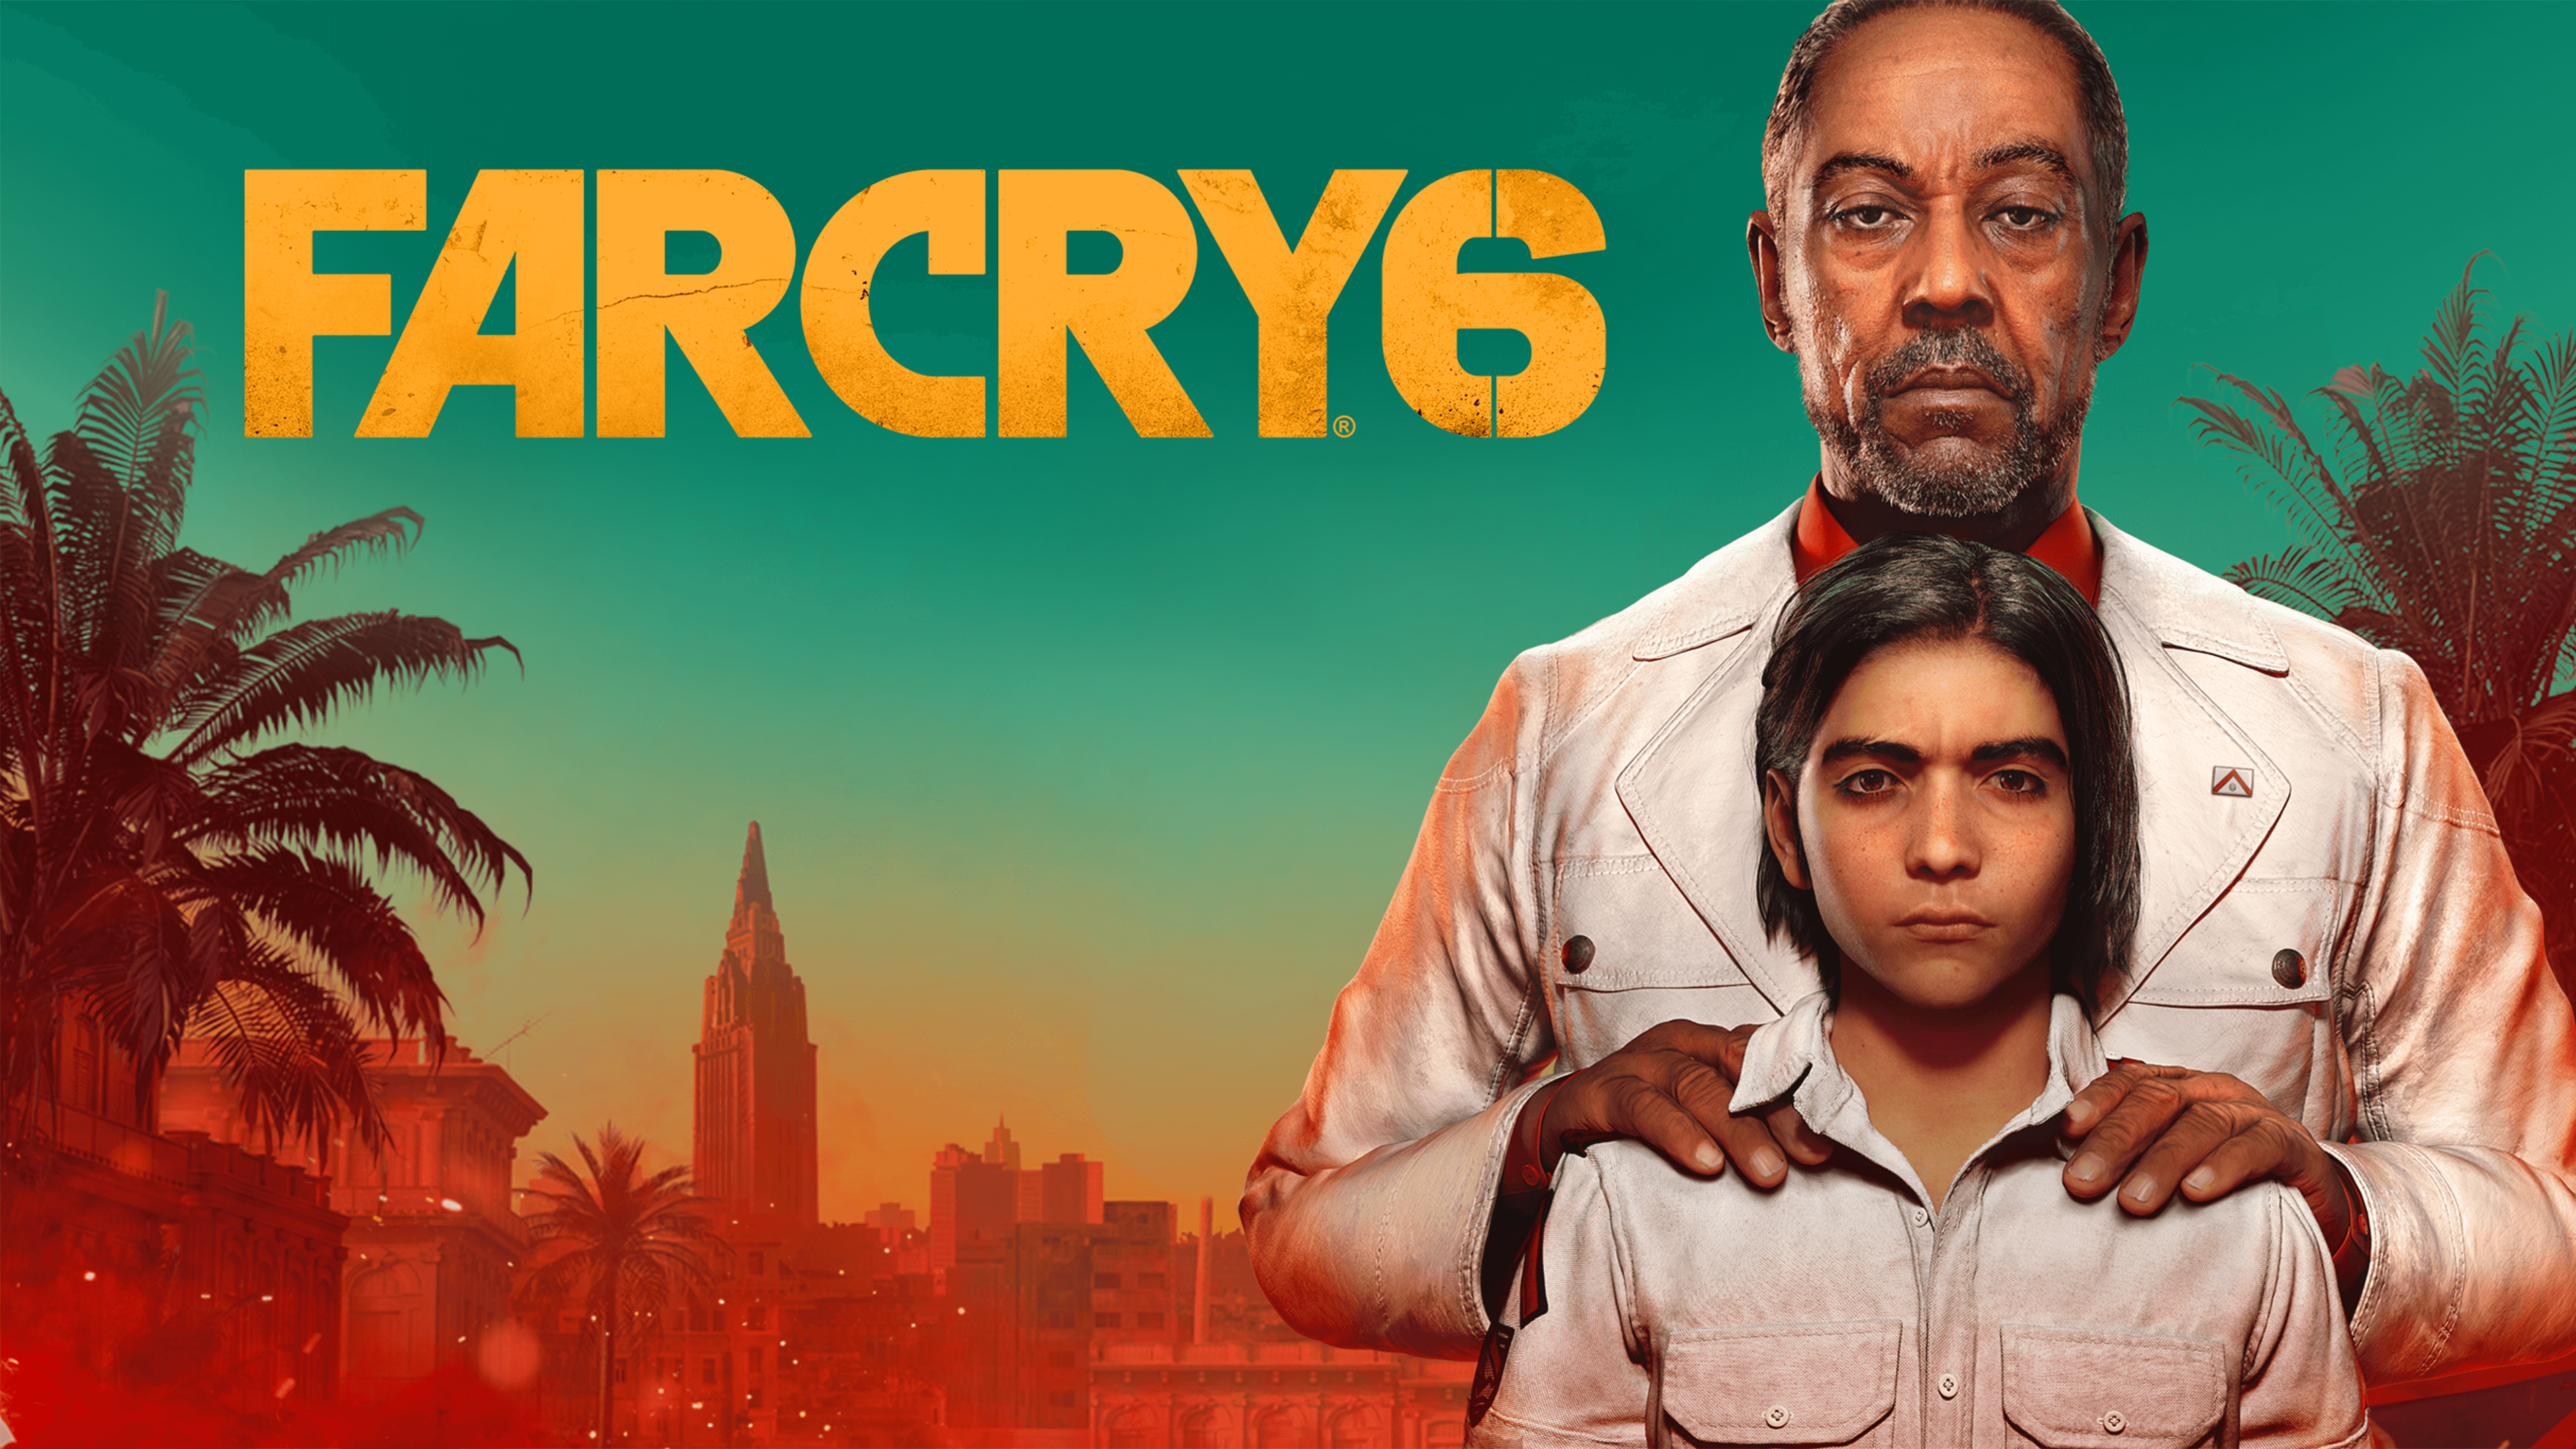 Download Far Cry 6 Crack Full Version PC 2021 Free